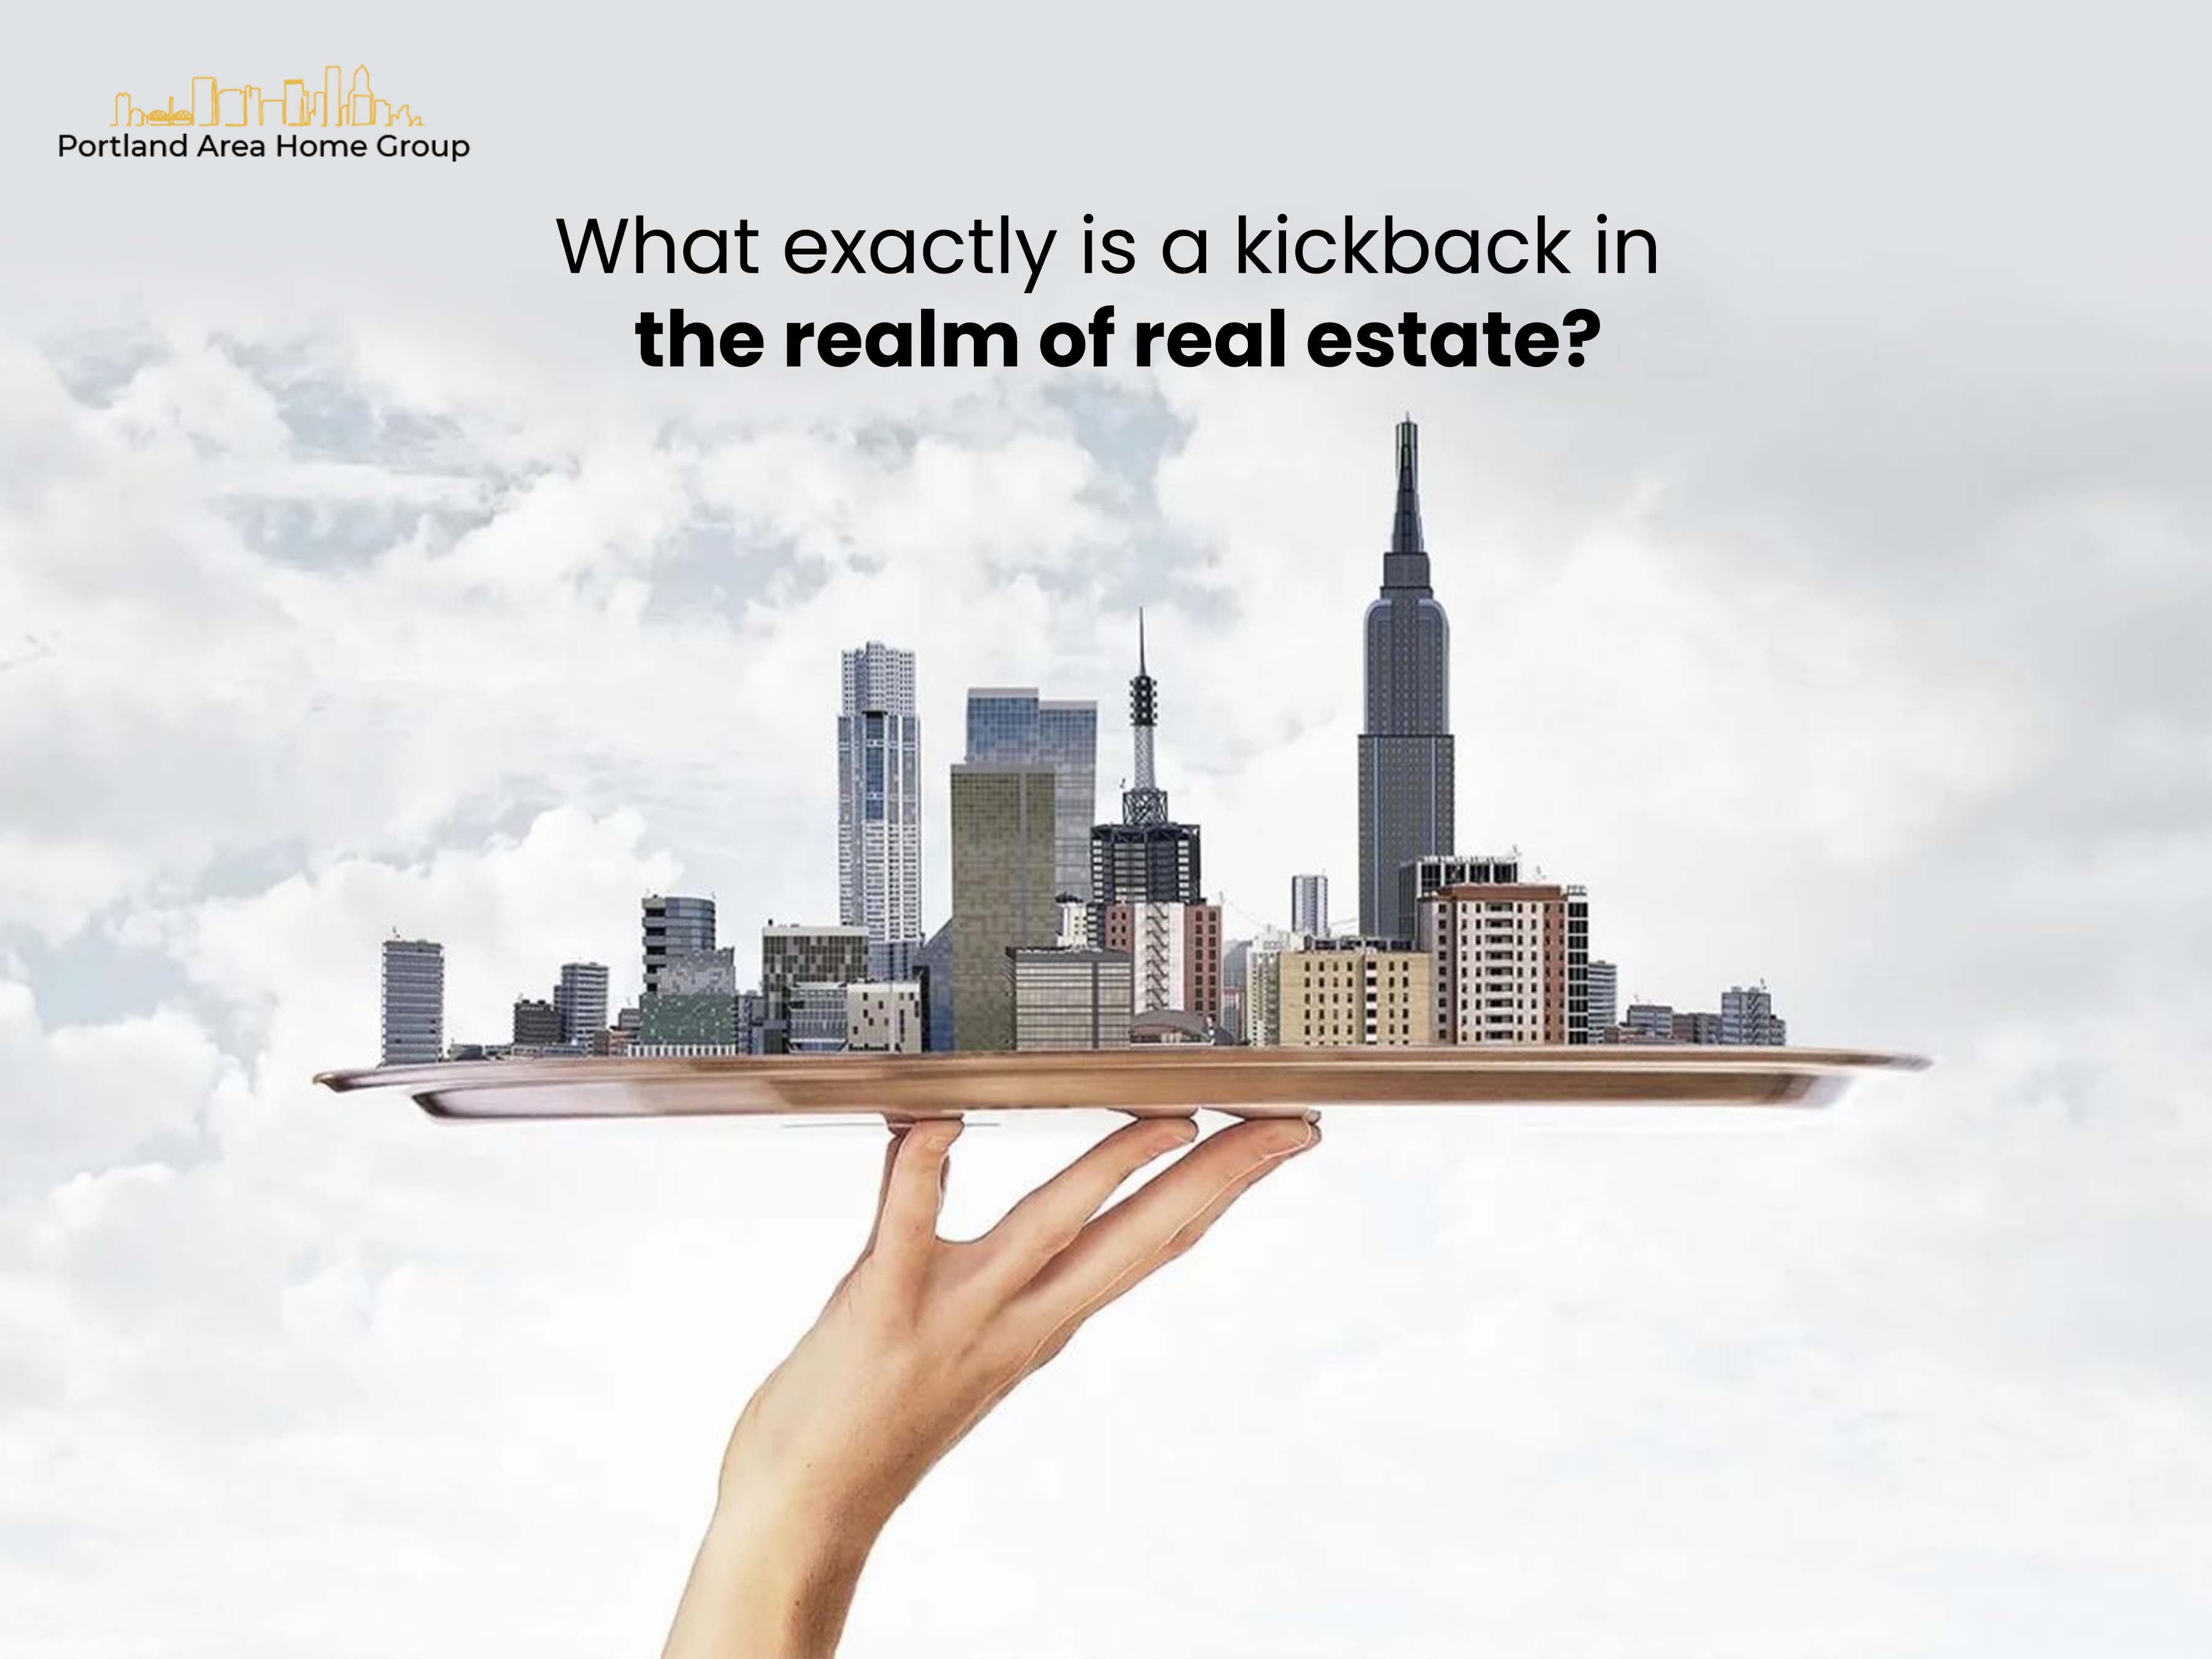 What exactly is a kickback in the realm of real estate?